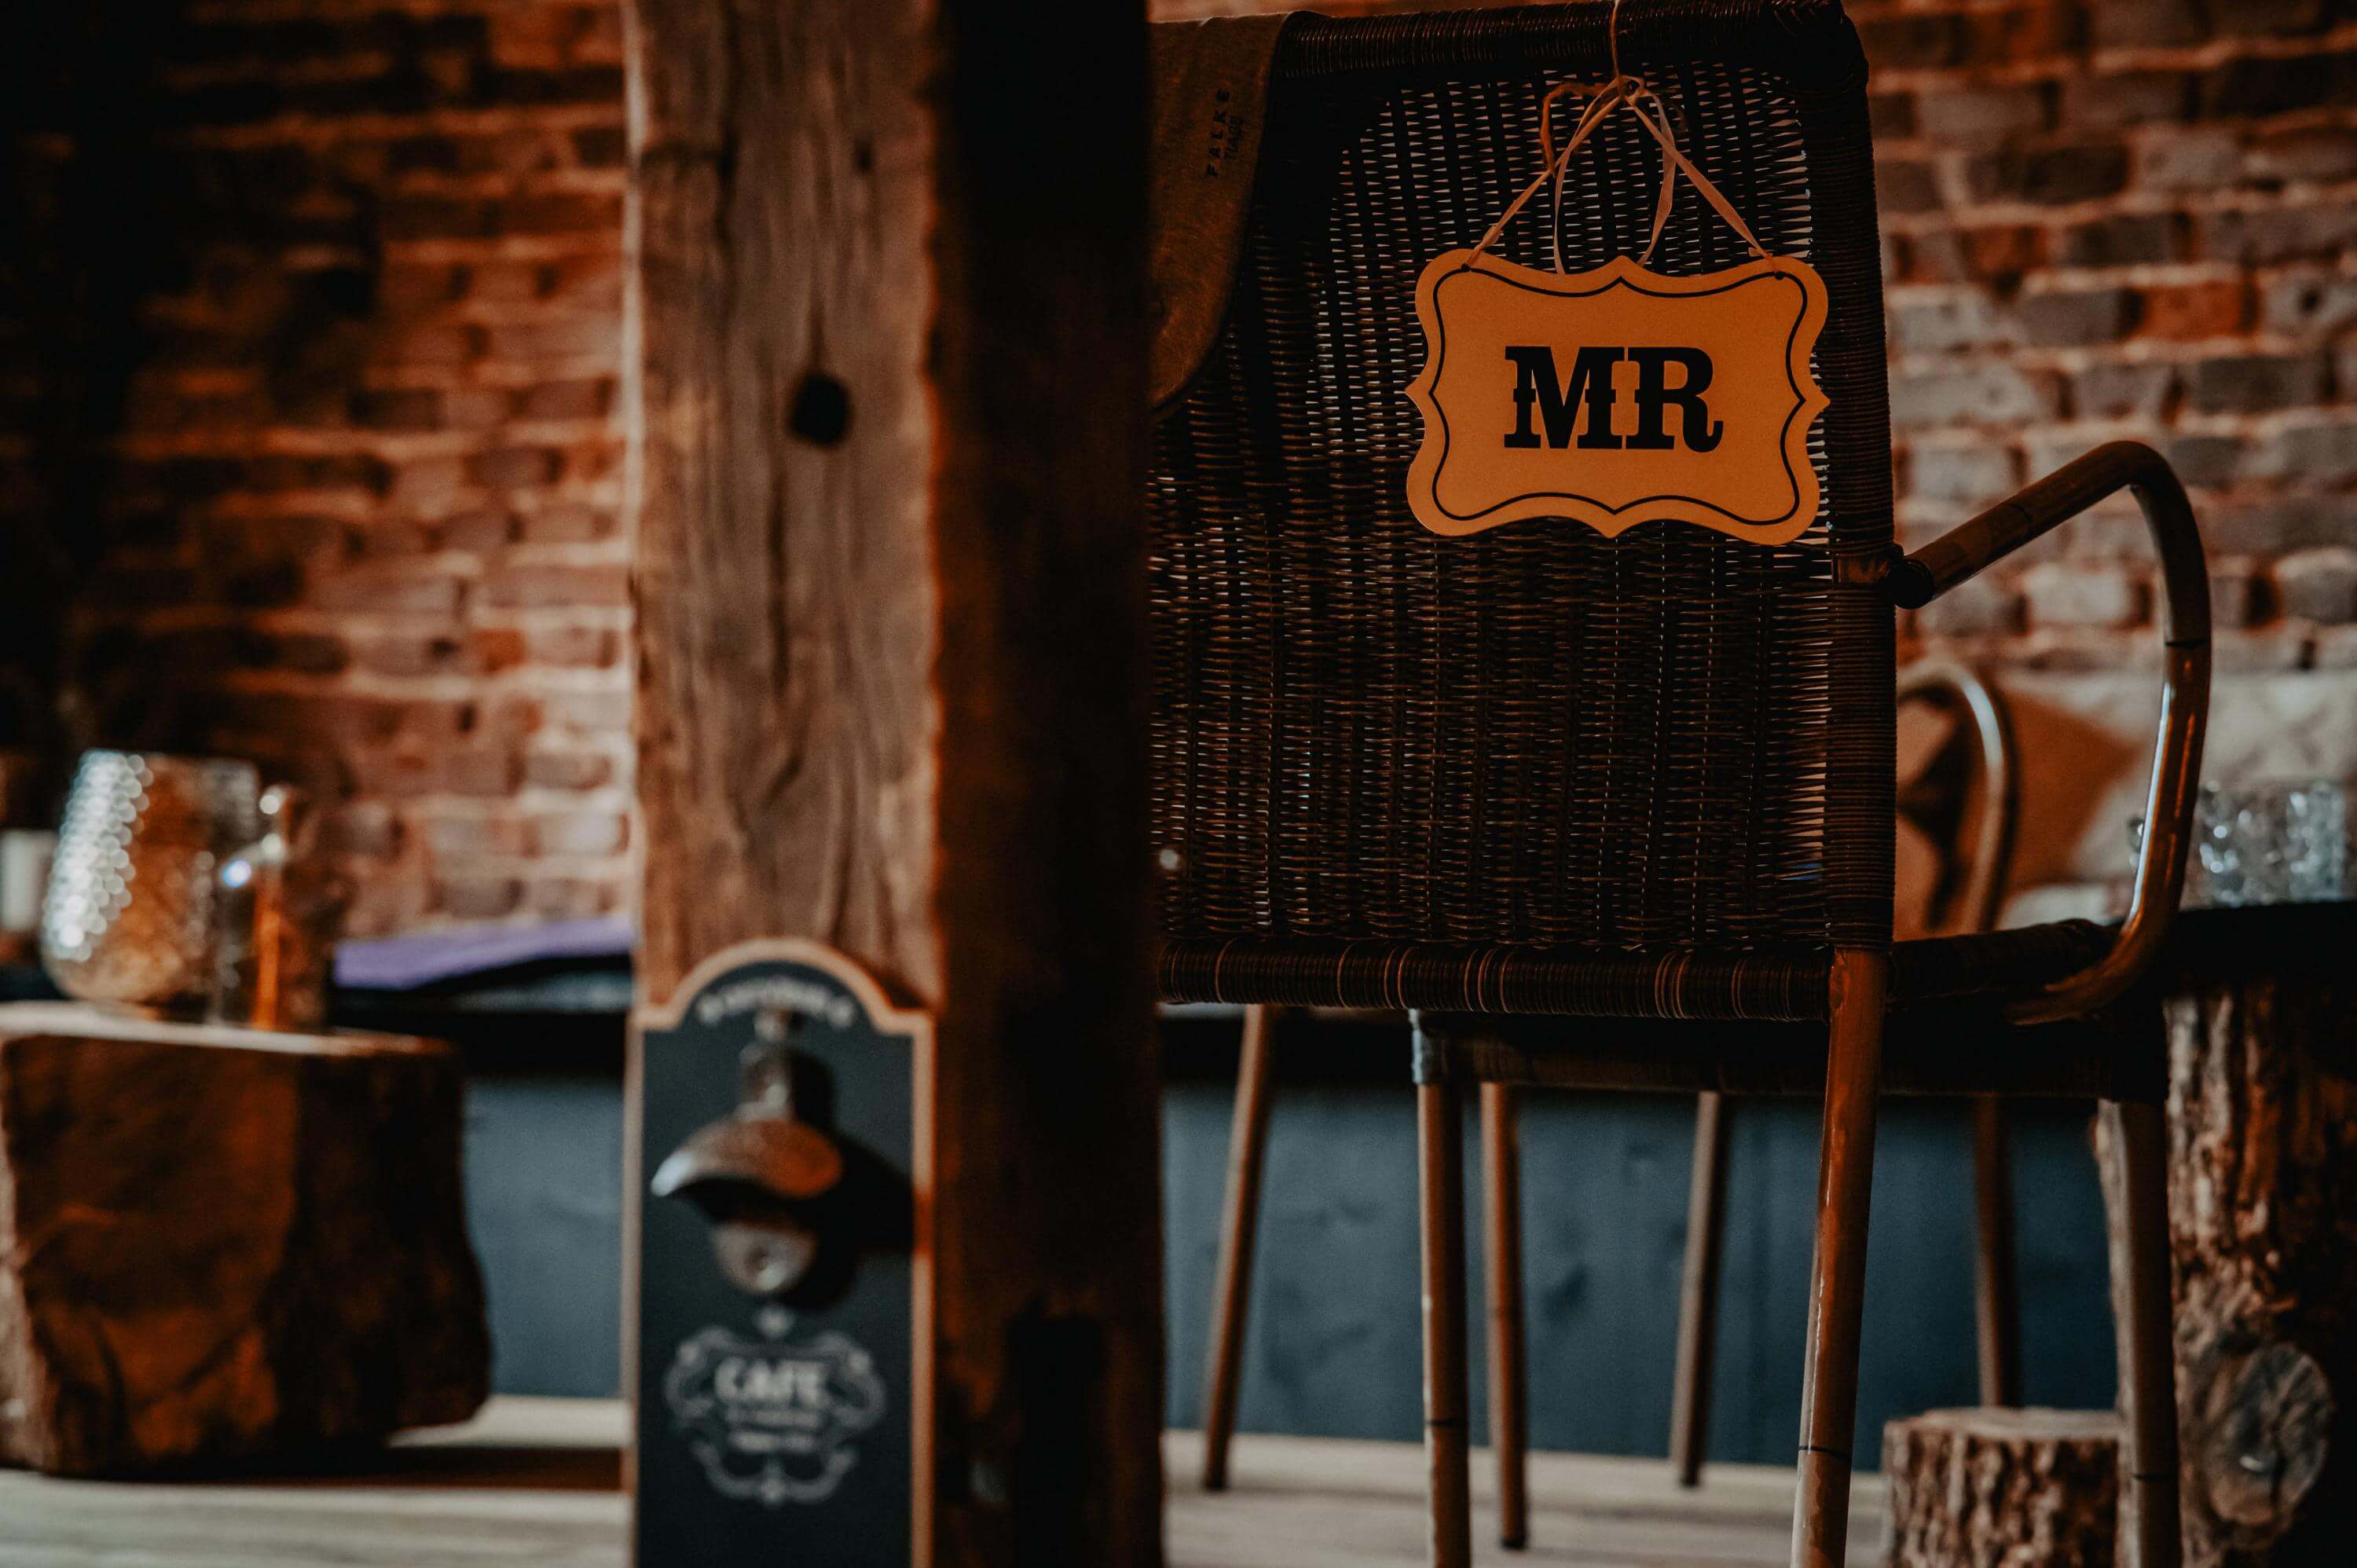 Behind a dark wooden support beam stands the wicker chair with a 'Mr' hanging tag ready for the groom's getting ready.